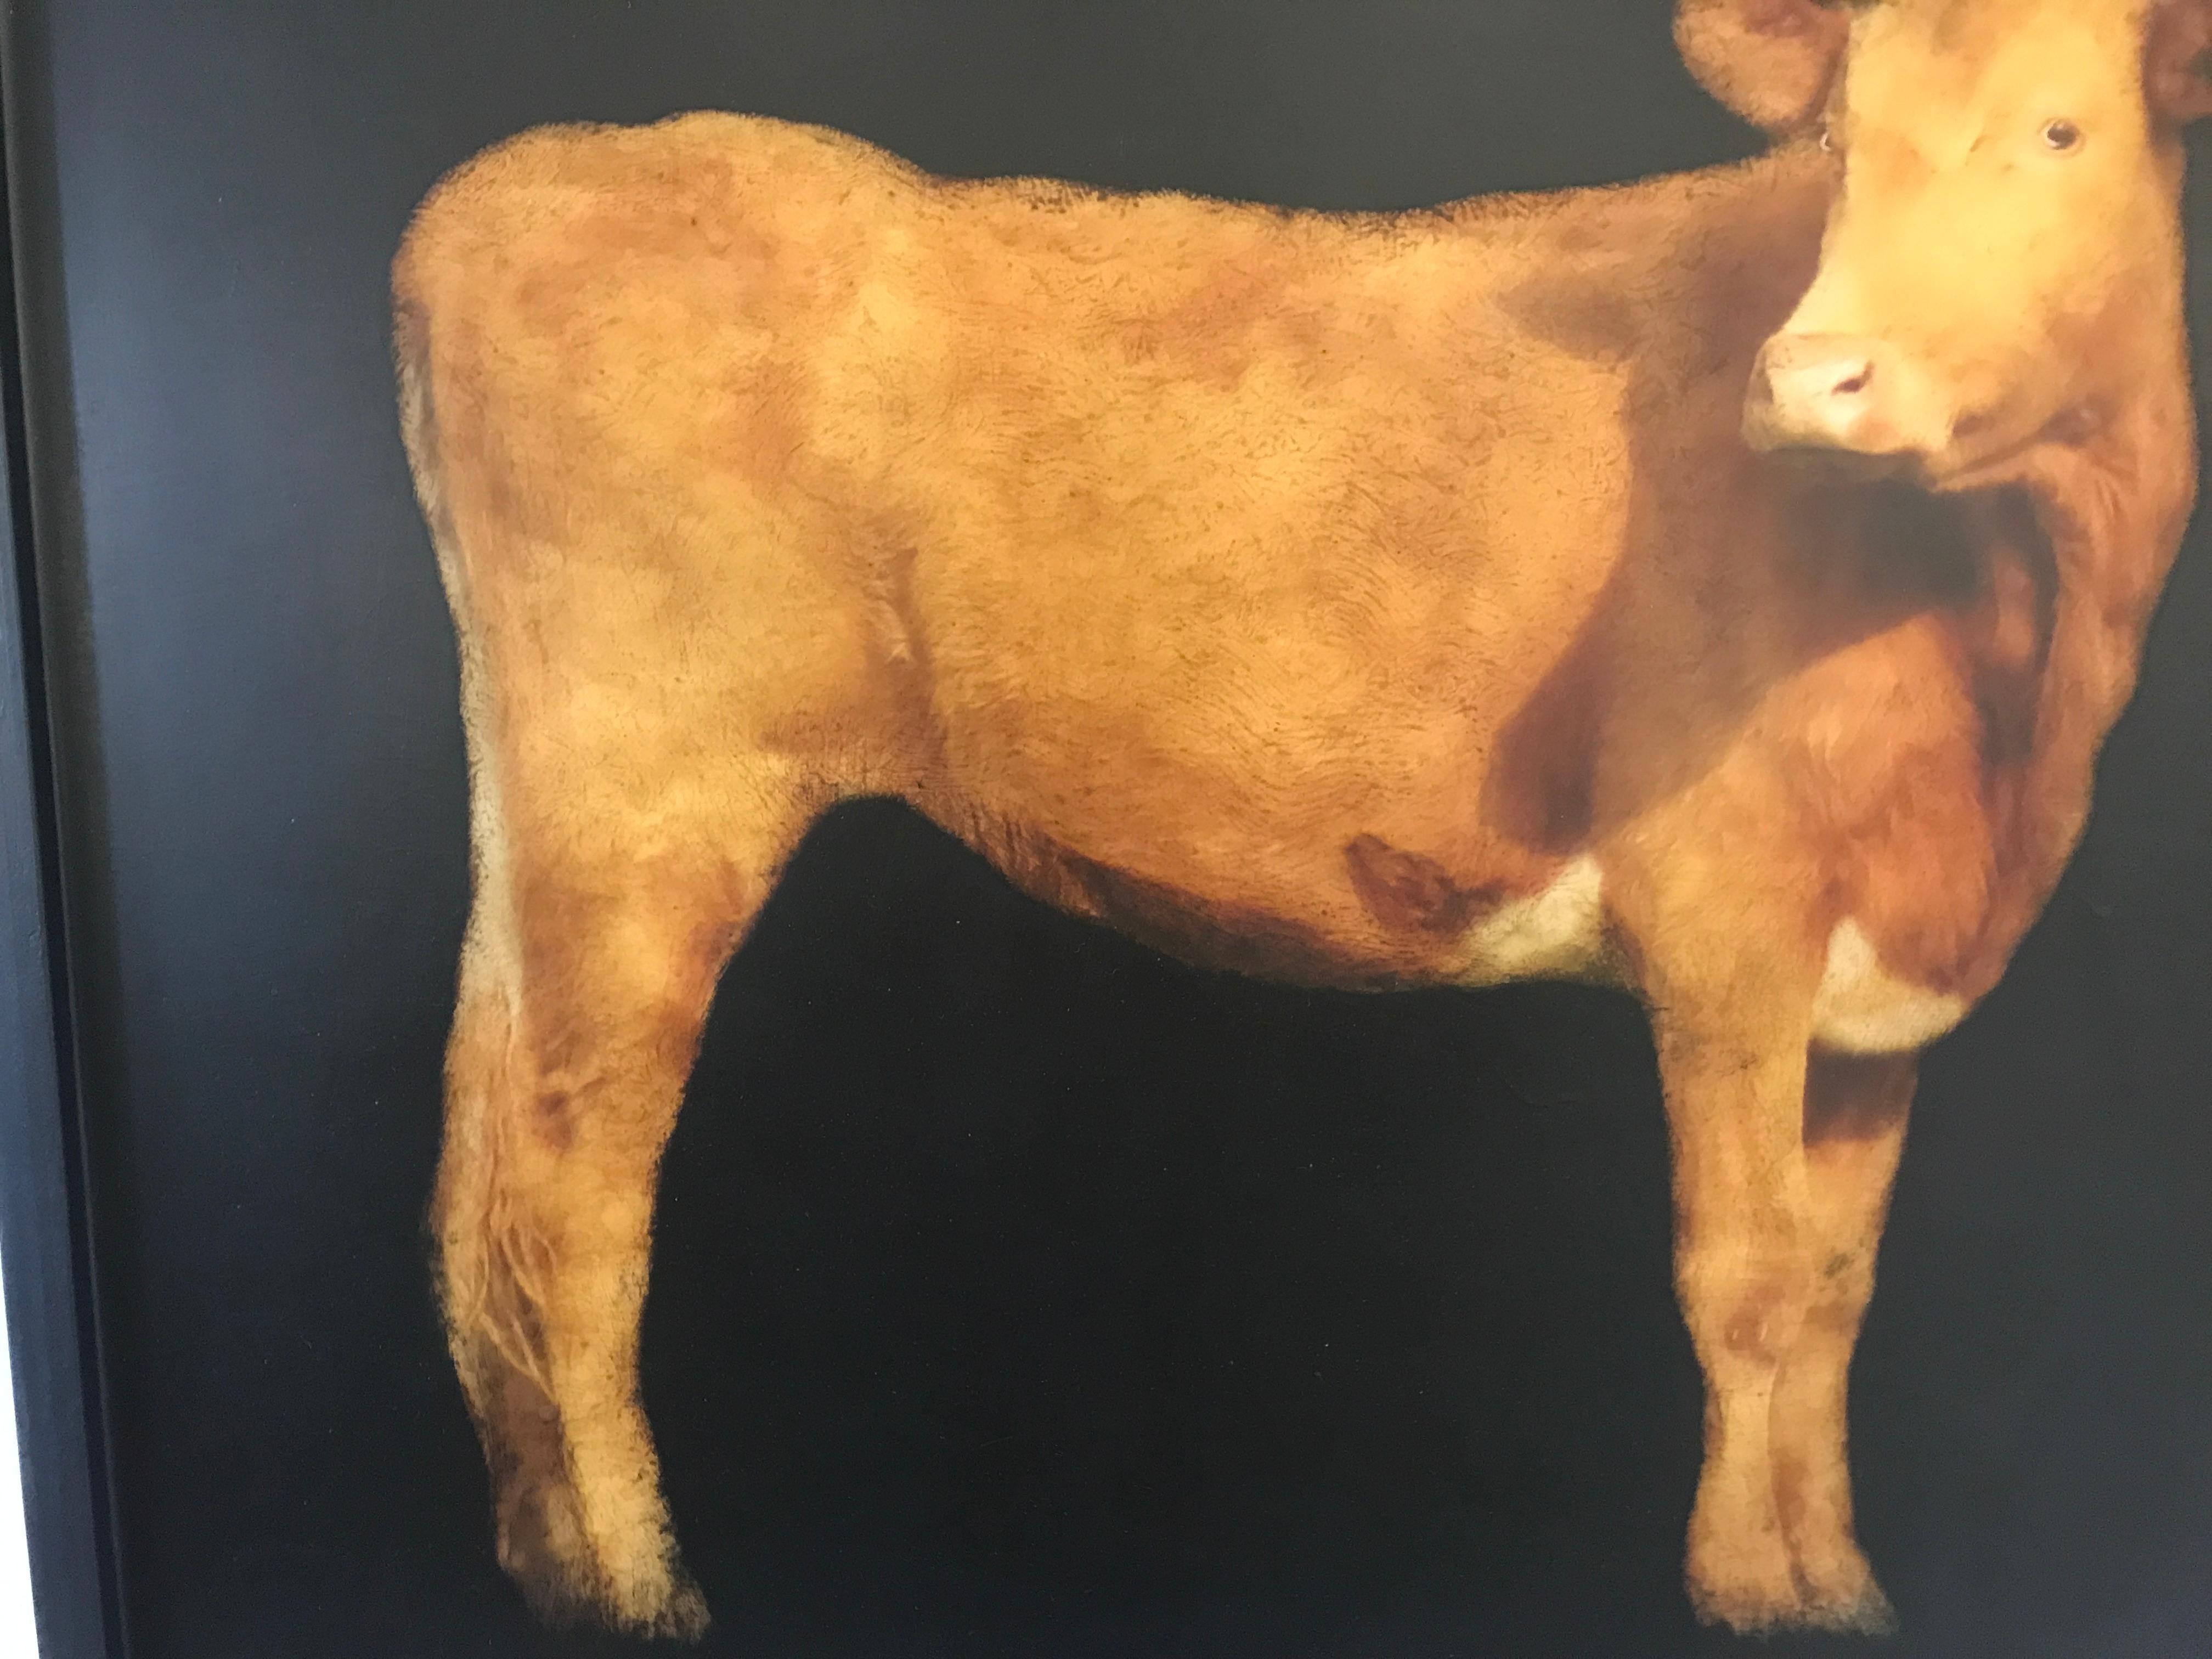 Brown Cow by Dawne Raulet, Framed Contemporary Mixed Media on Board Painting 4